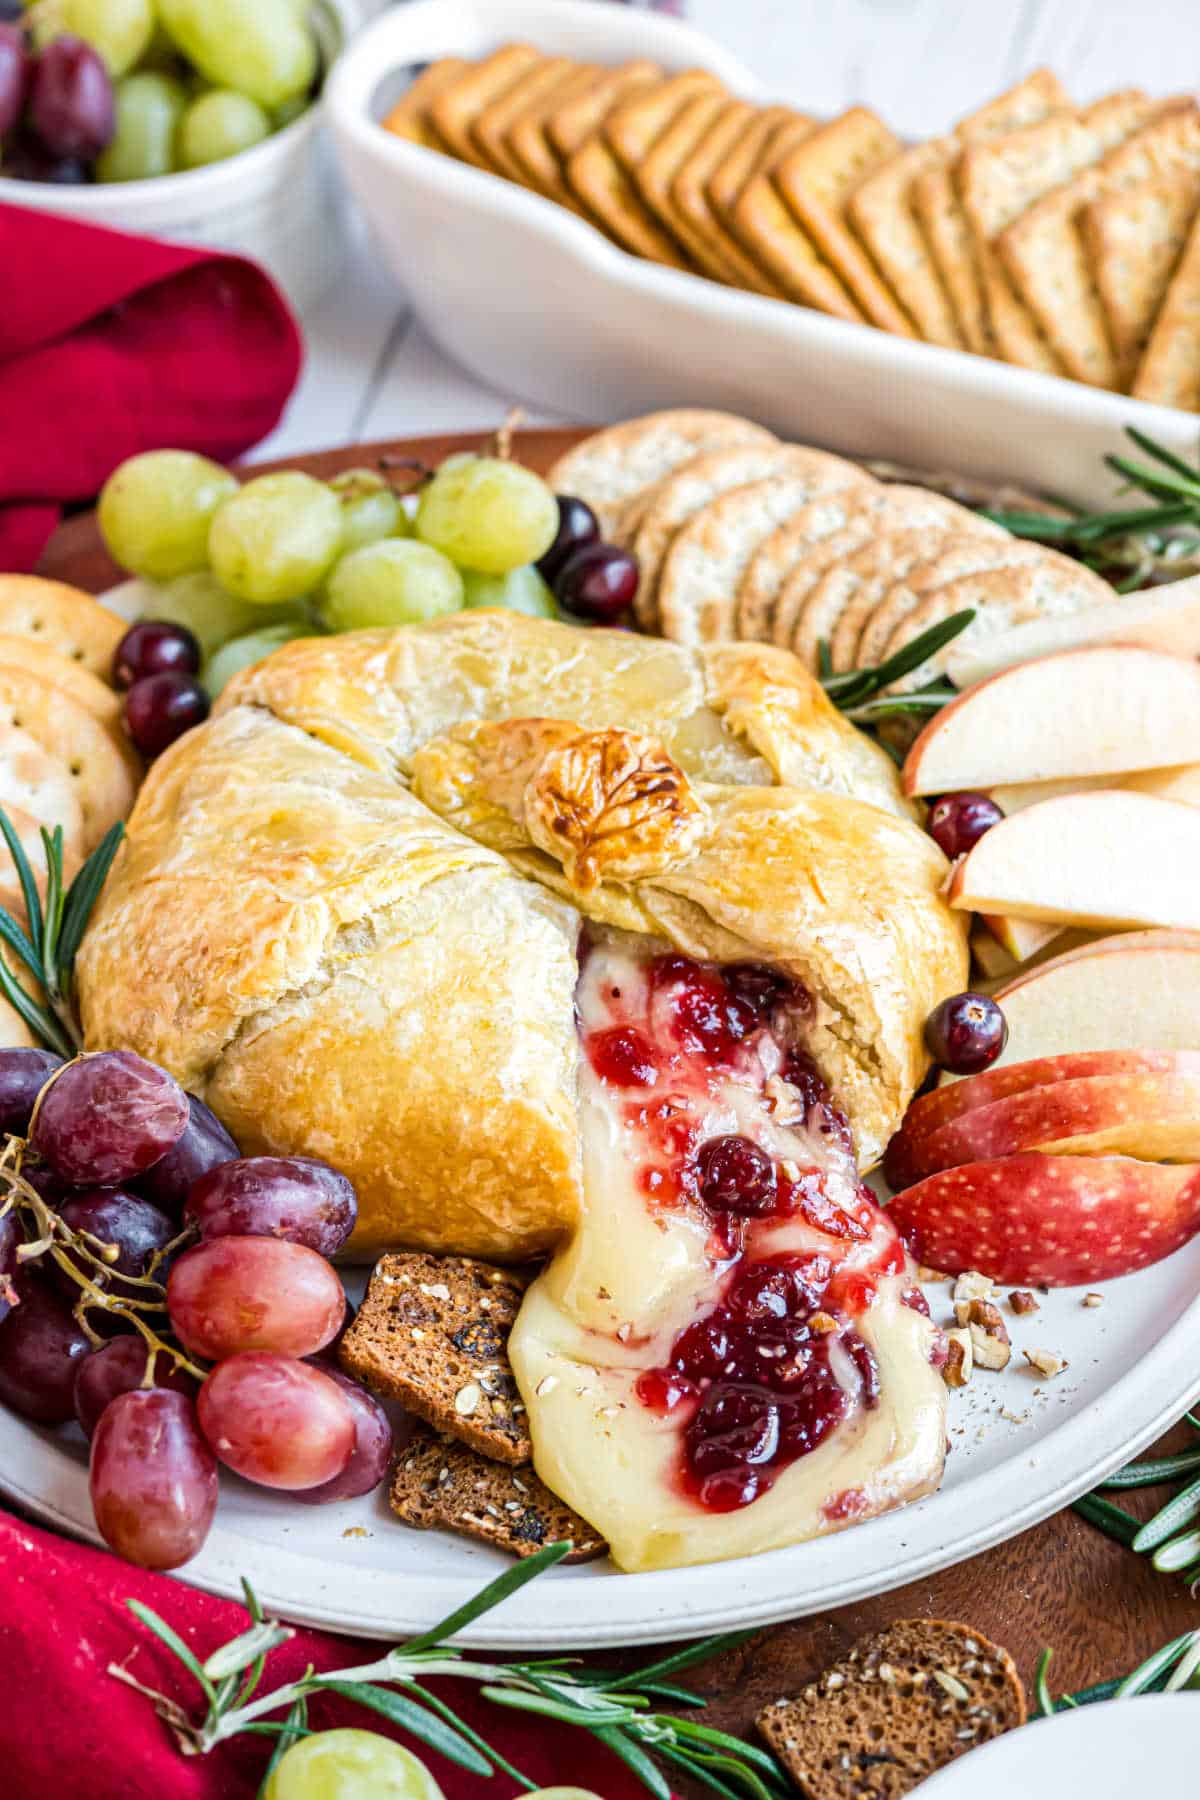 Brie with cranberries and pecans oozing out of baked puff pastry.